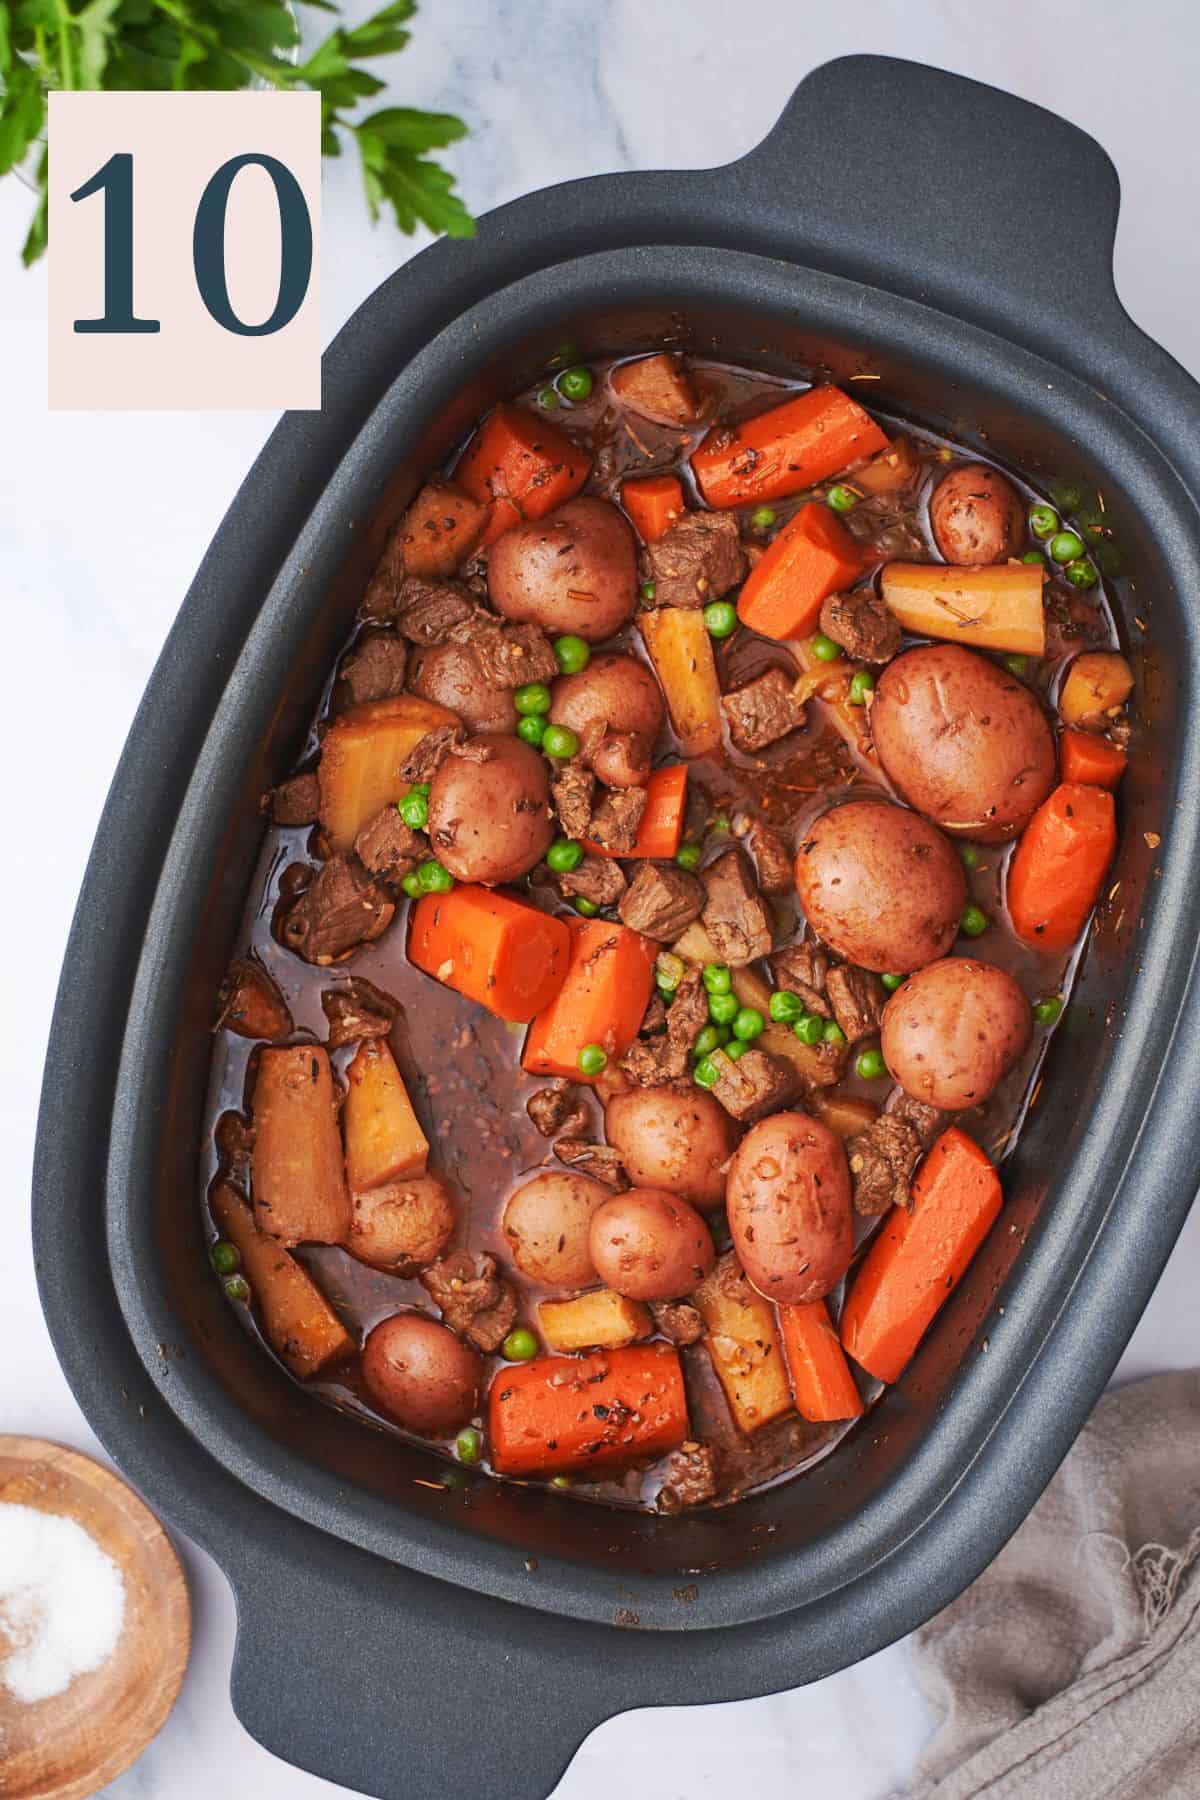 hearty beef stew with potatoes, carrots, parsnips, and peas in a slow cooker.